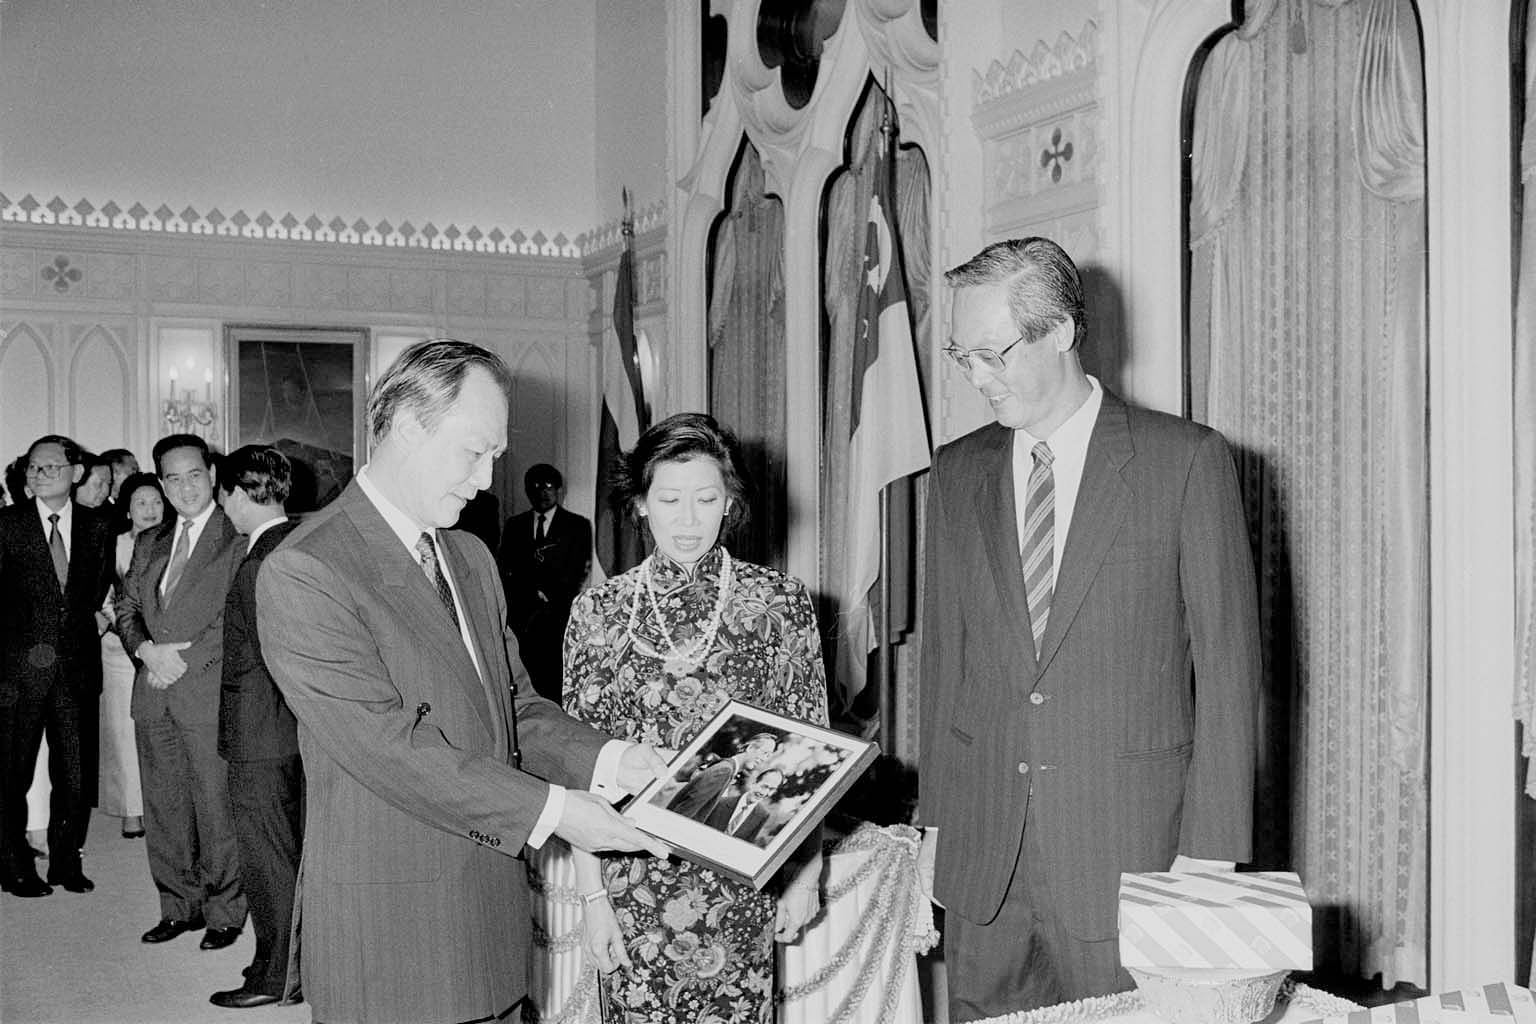 Mr Goh Chok Tong's FTA approach began in the early 1990s, when he worked closely with then-Thai Prime Minister Anand Panyarachun (left) to launch an Asean Free Trade Area in 1992. The two leaders are photographed here in 1991 with Mrs Goh Chok Tong. 